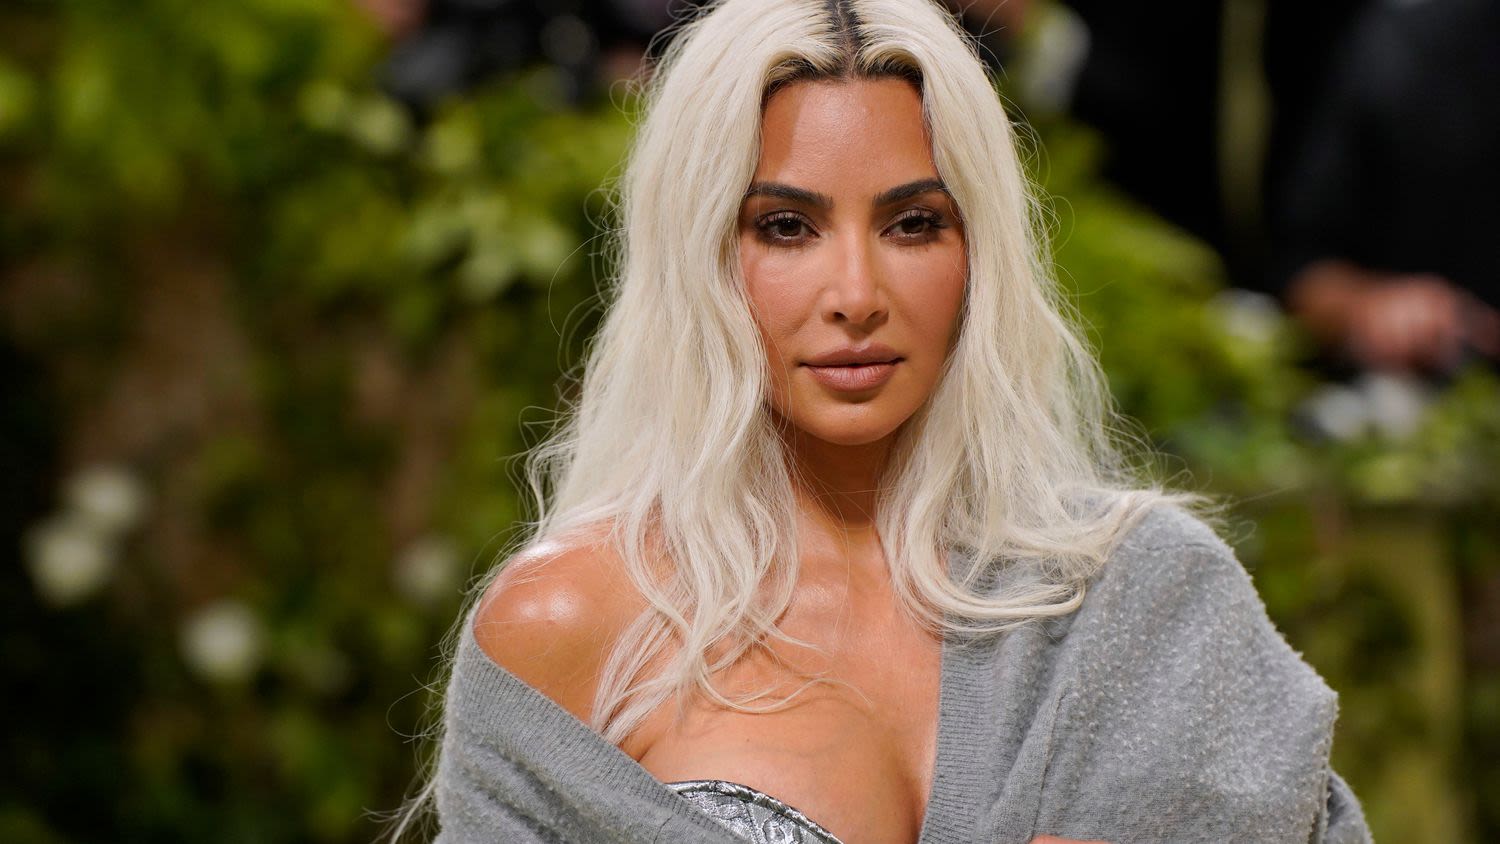 Kim Kardashian Is Dividing the Internet Again With Another Controversial Corset Look